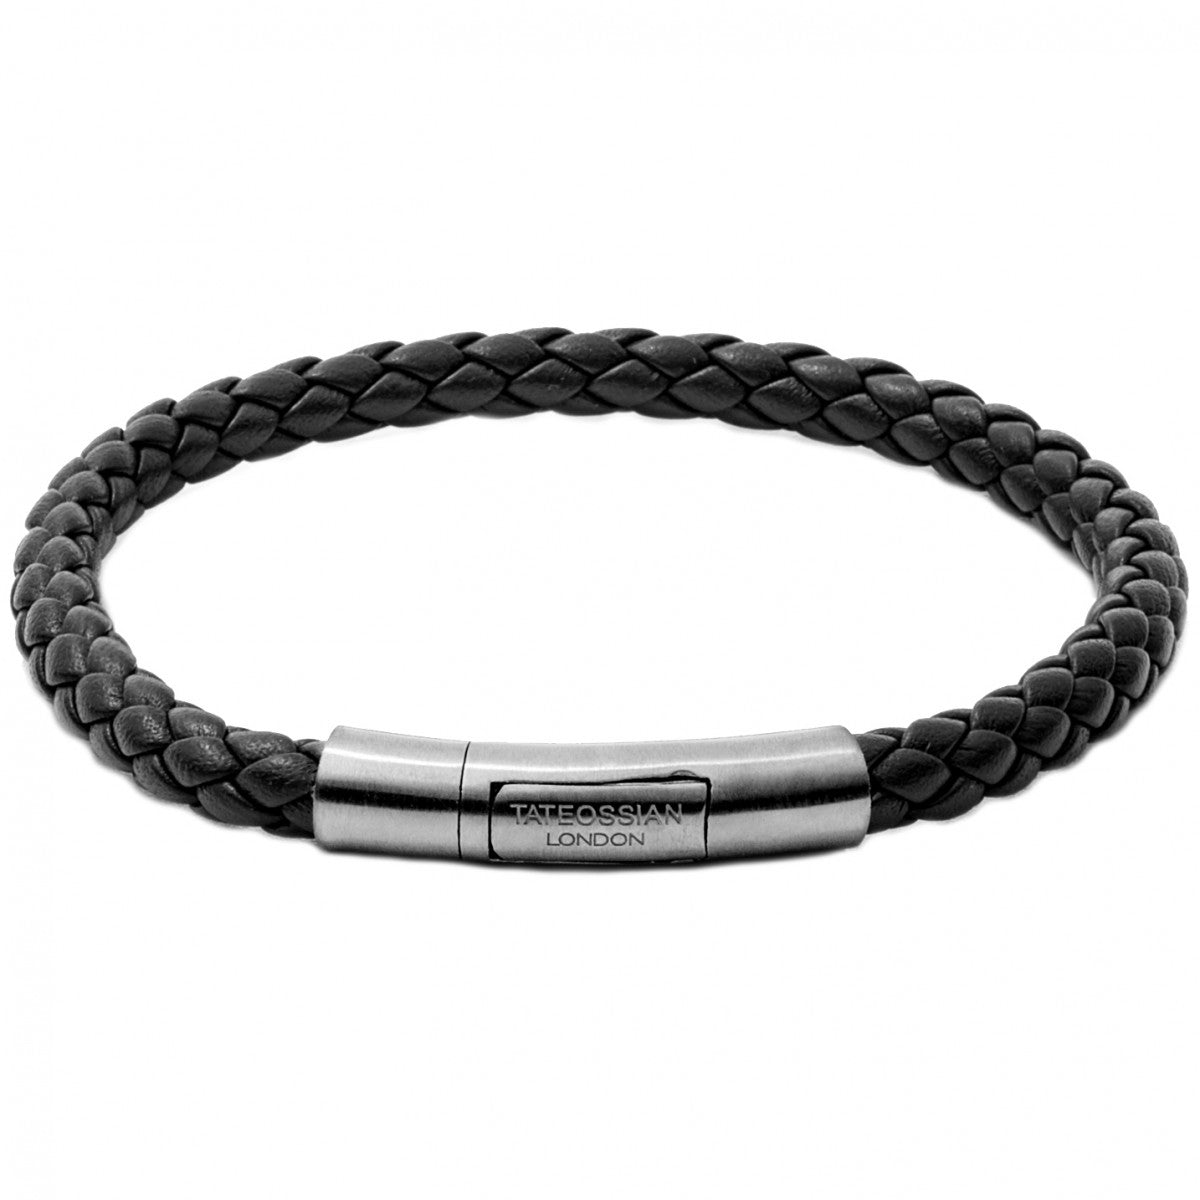 Tateossian Tubo Charles Taito Men's Leather and Silver Bracelet